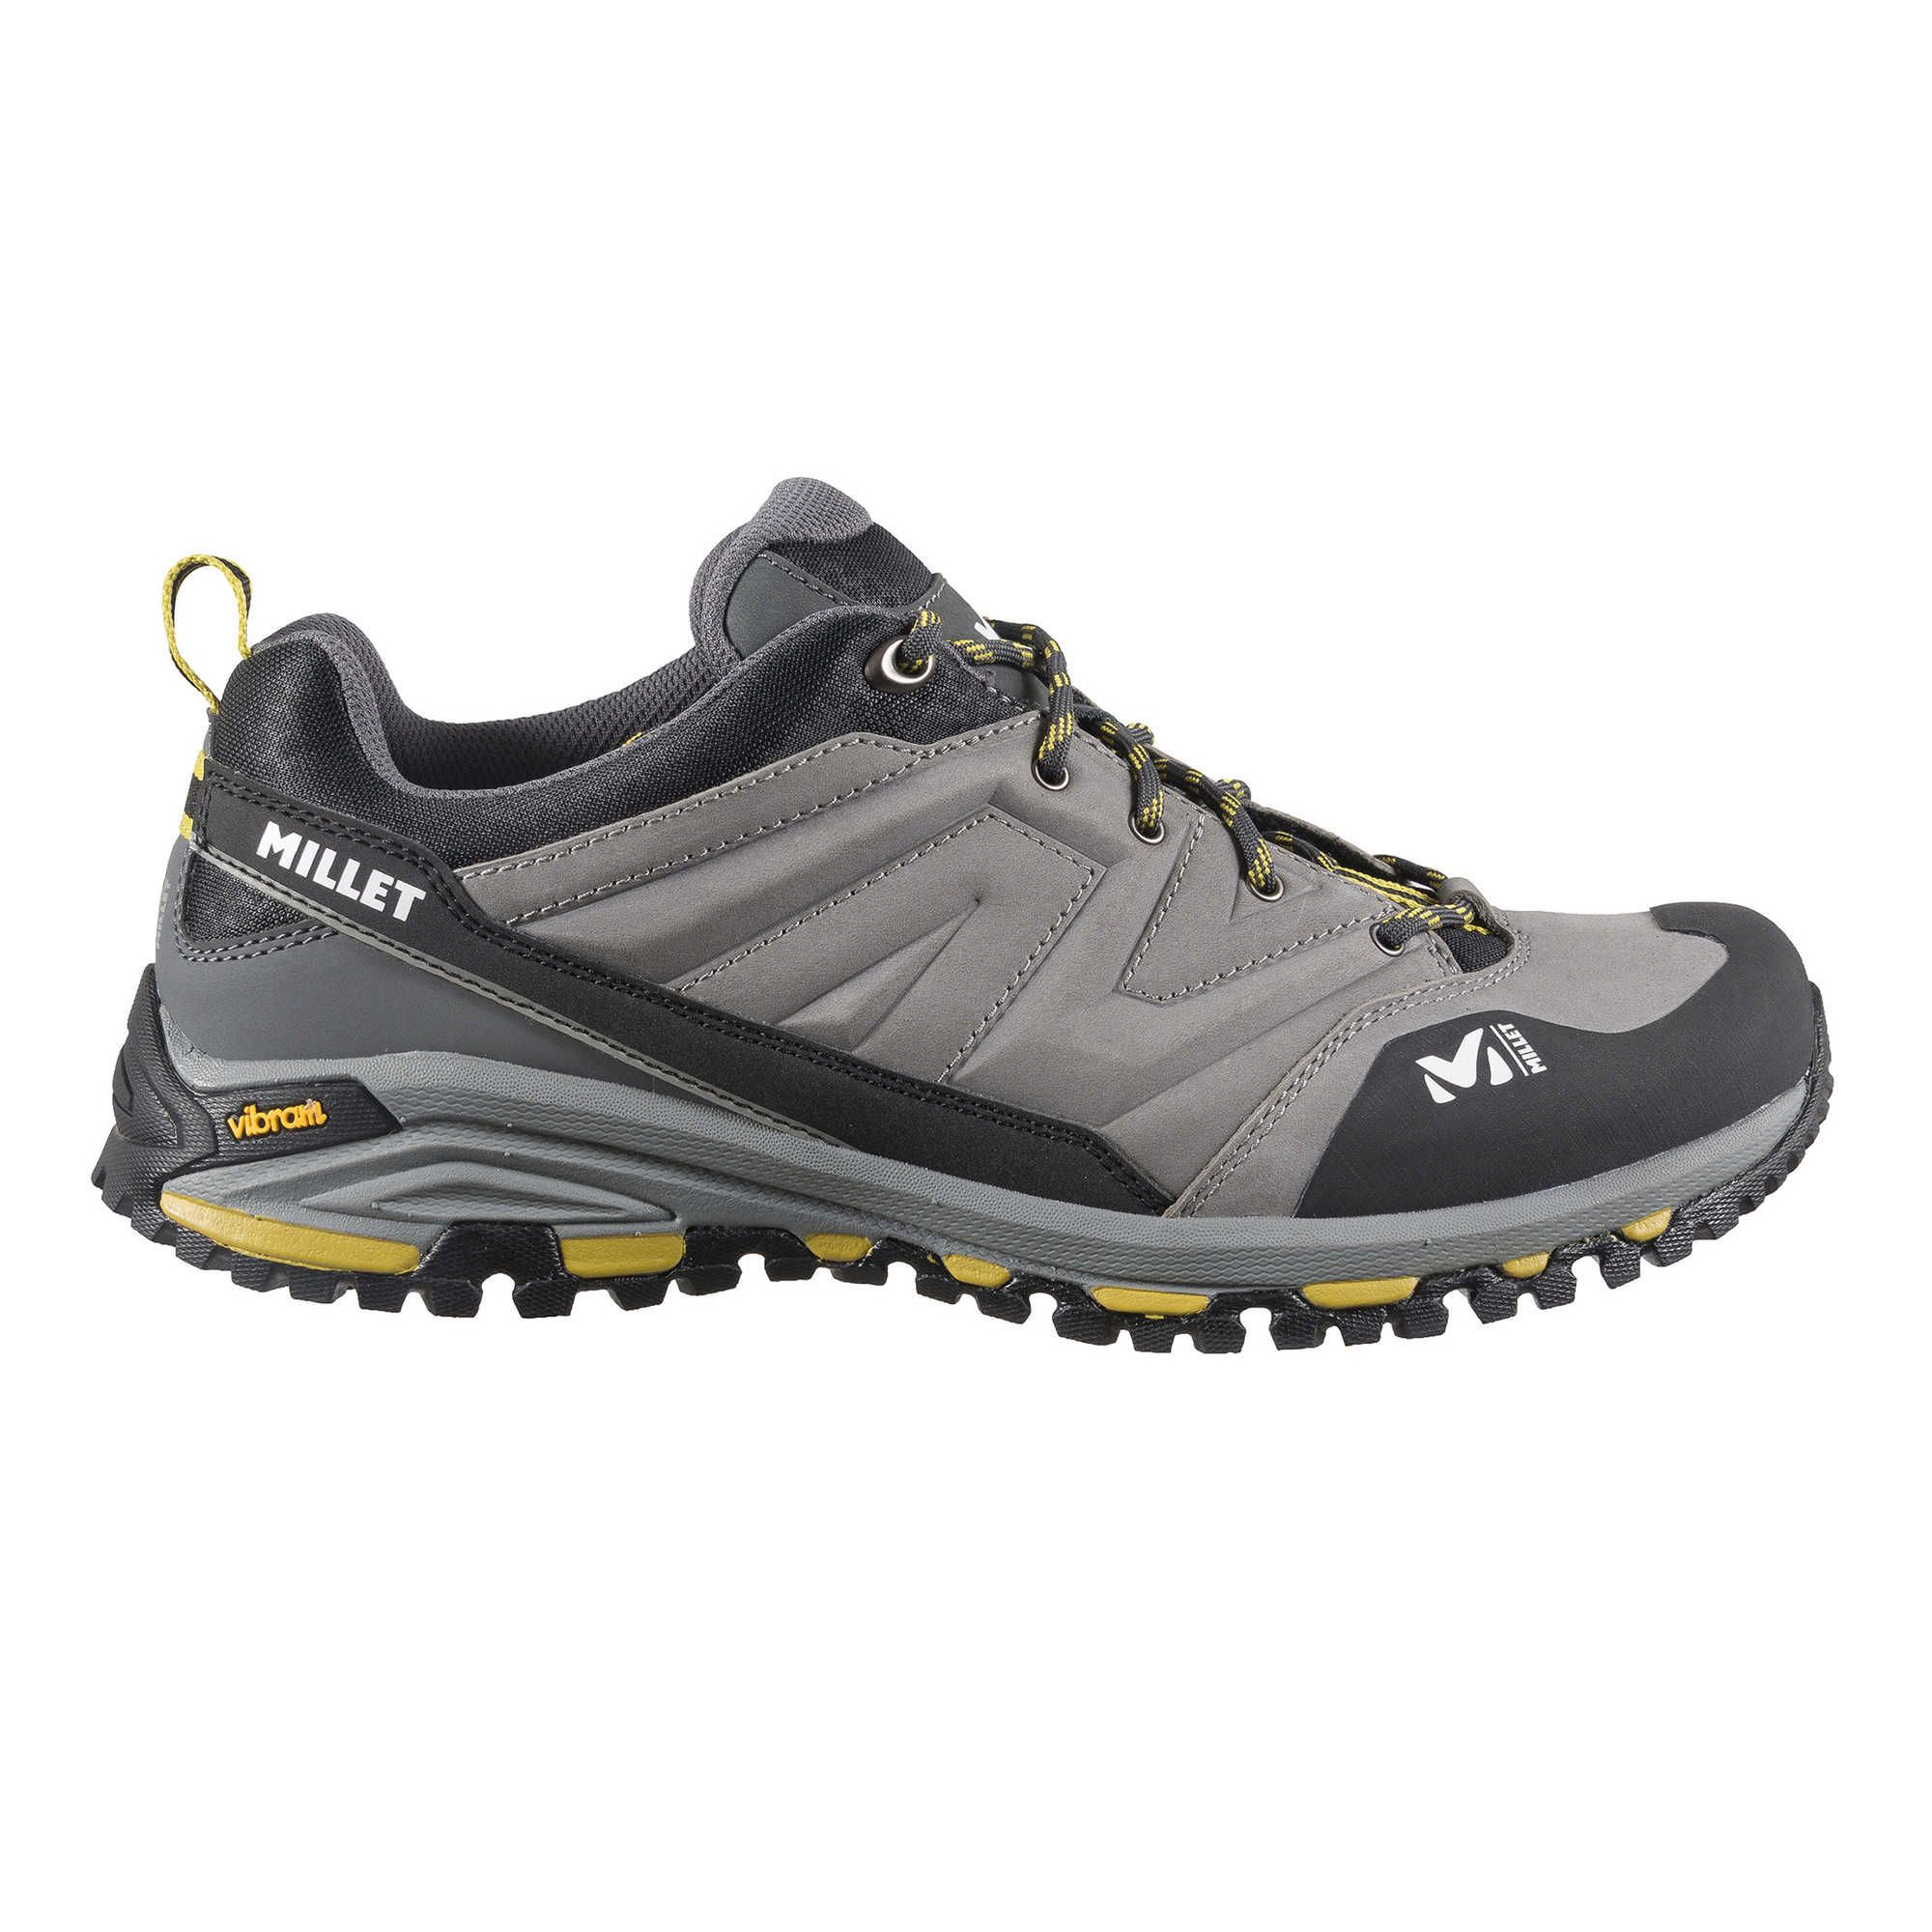 Chaussures de marche/course Hike Up - Deep Grey / Anthracite 